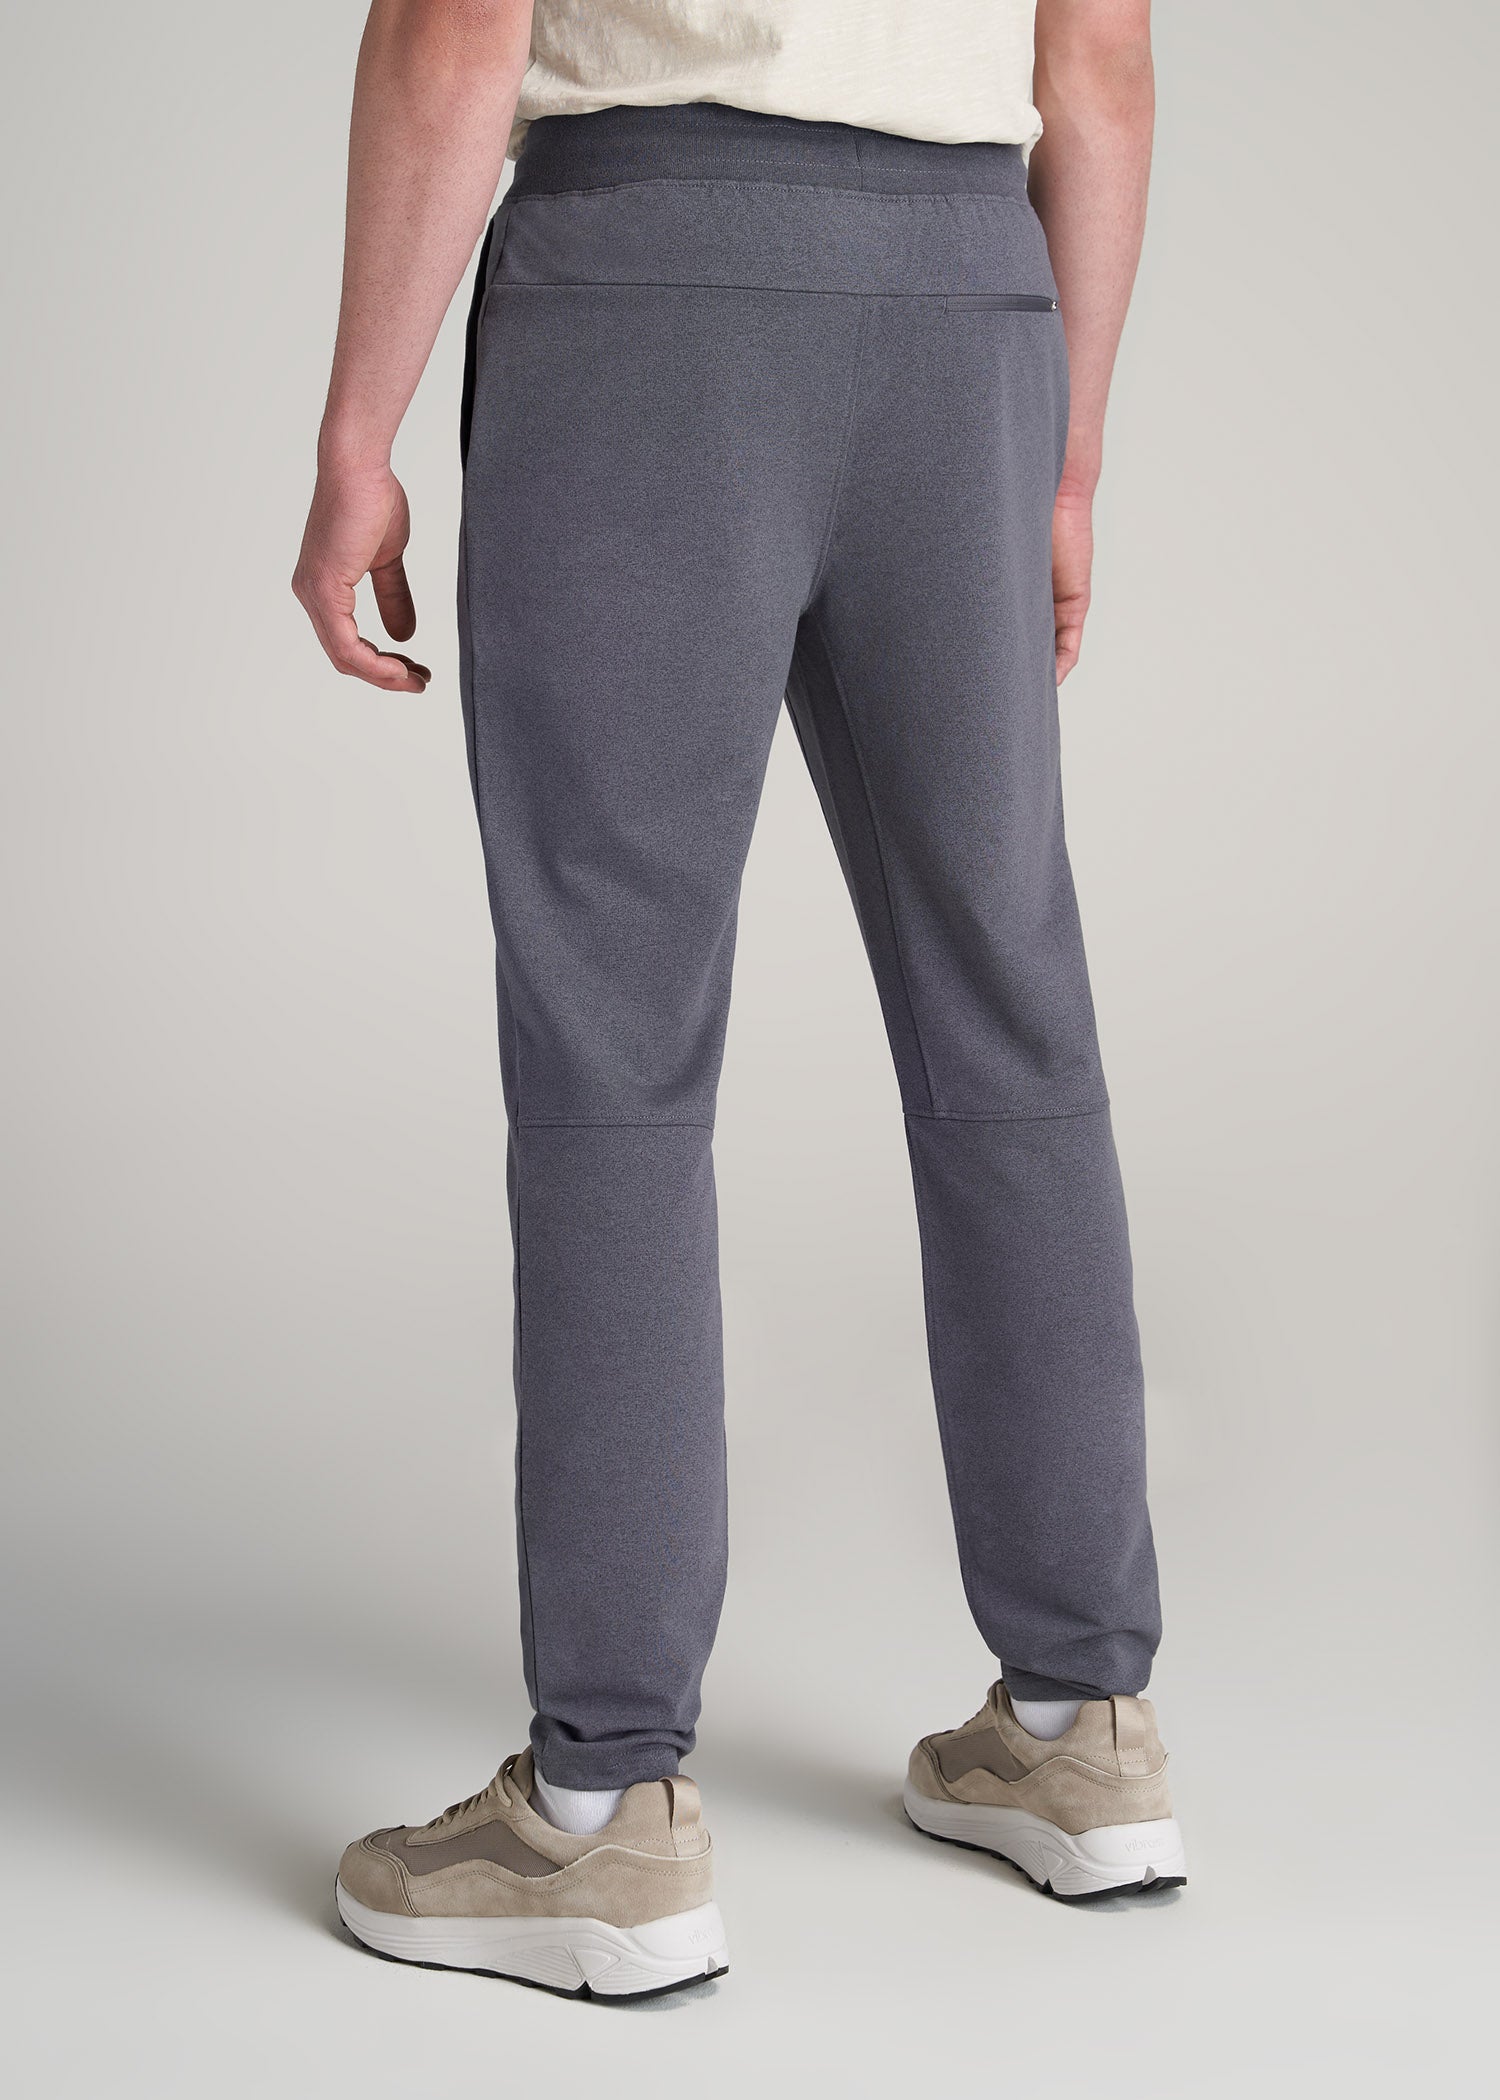 Men's Tall Performance French Terry Sweatpants Tech Charcoal Mix